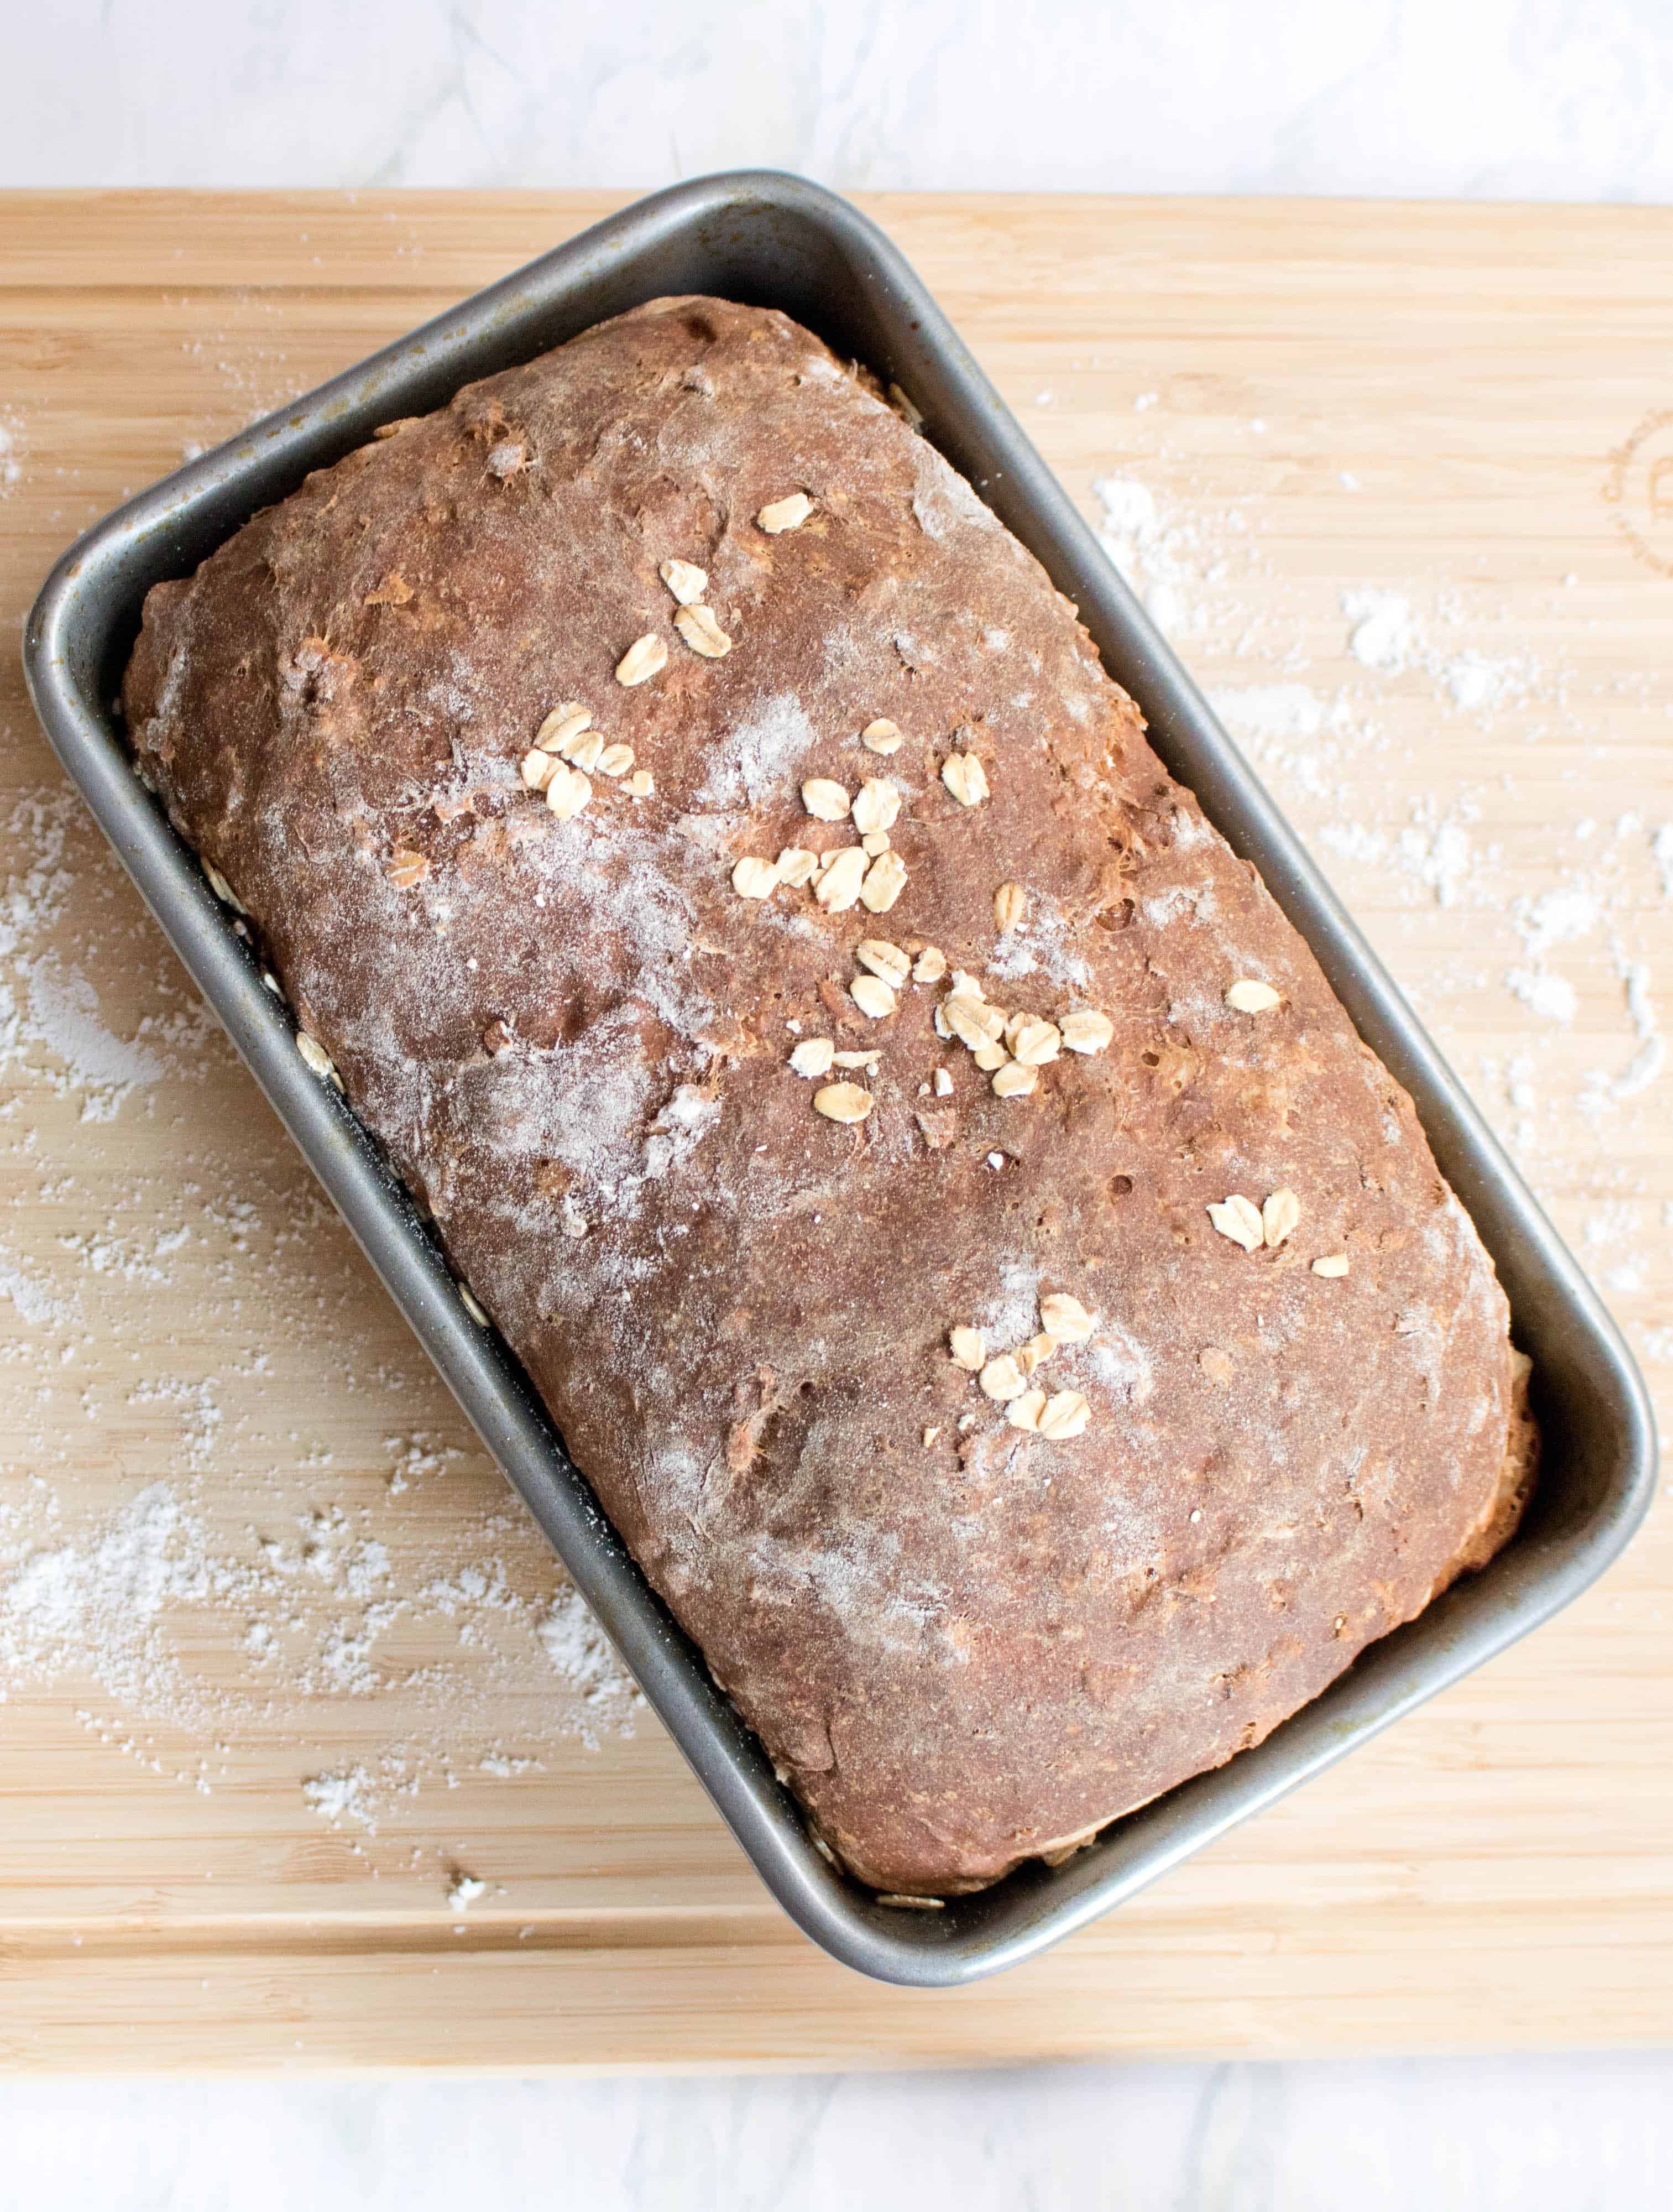 This Whole Wheat Honey Oat Bread is the perfect healthy, hearty, sandwich bread and easy enough for any new bread baker to make!